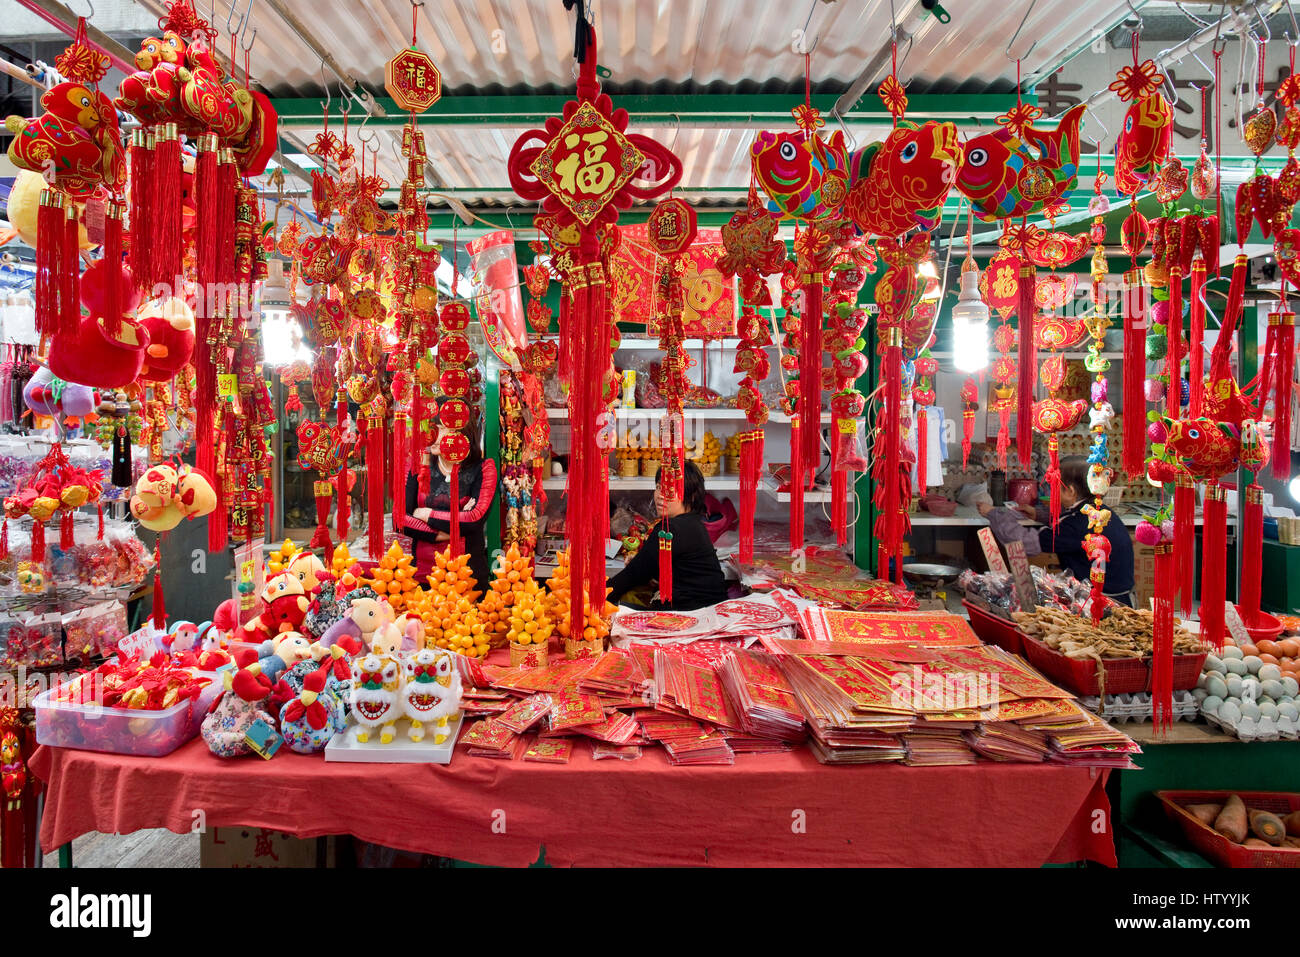 Chinese new year decorations hanging up for sale at a market in Hong Kong. Stock Photo